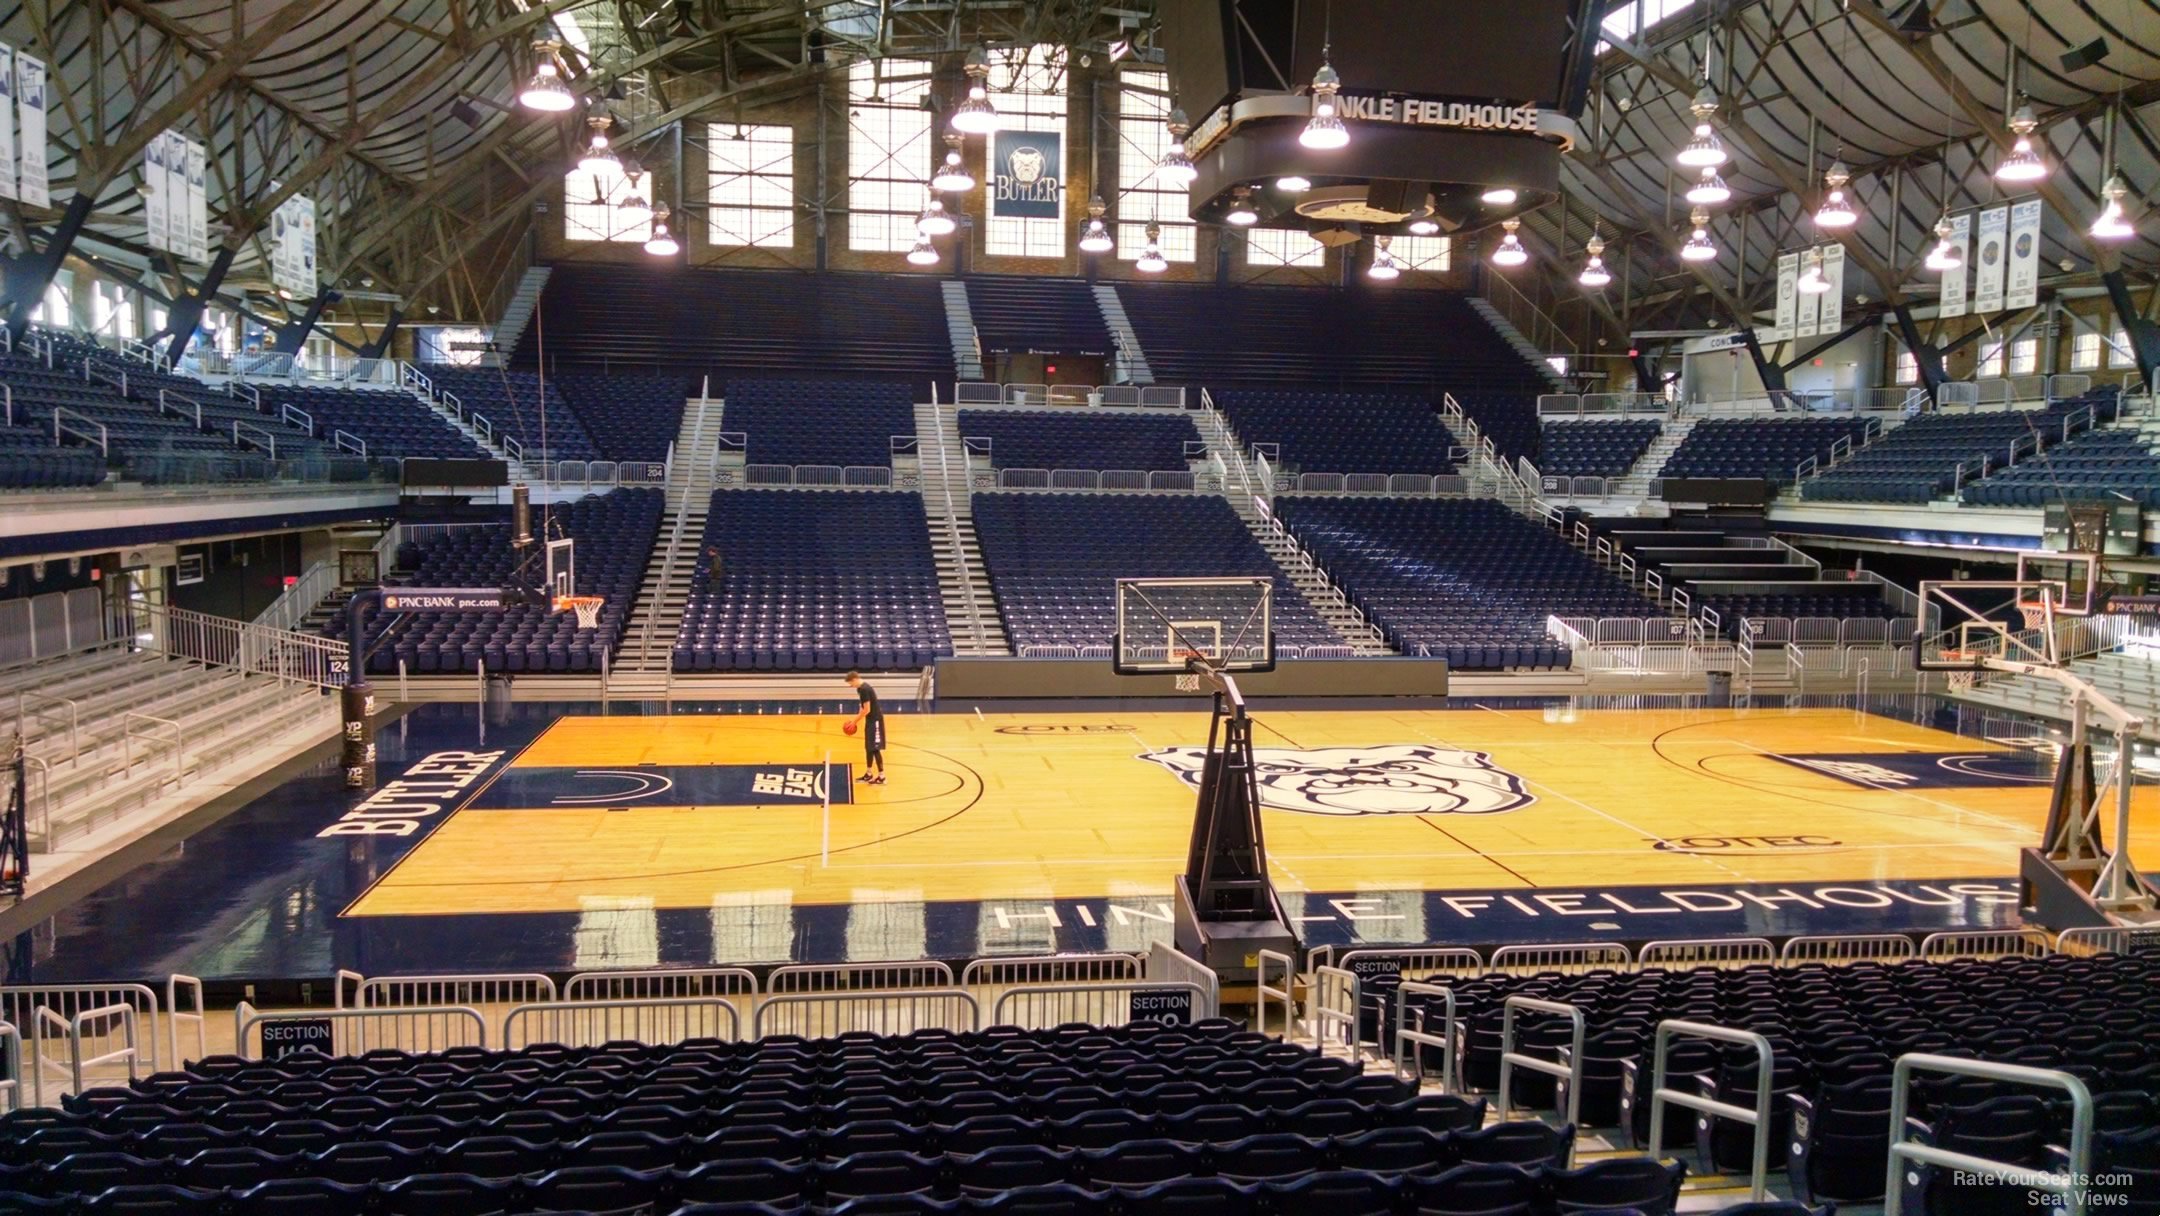 section 119, row 18 seat view  - hinkle fieldhouse